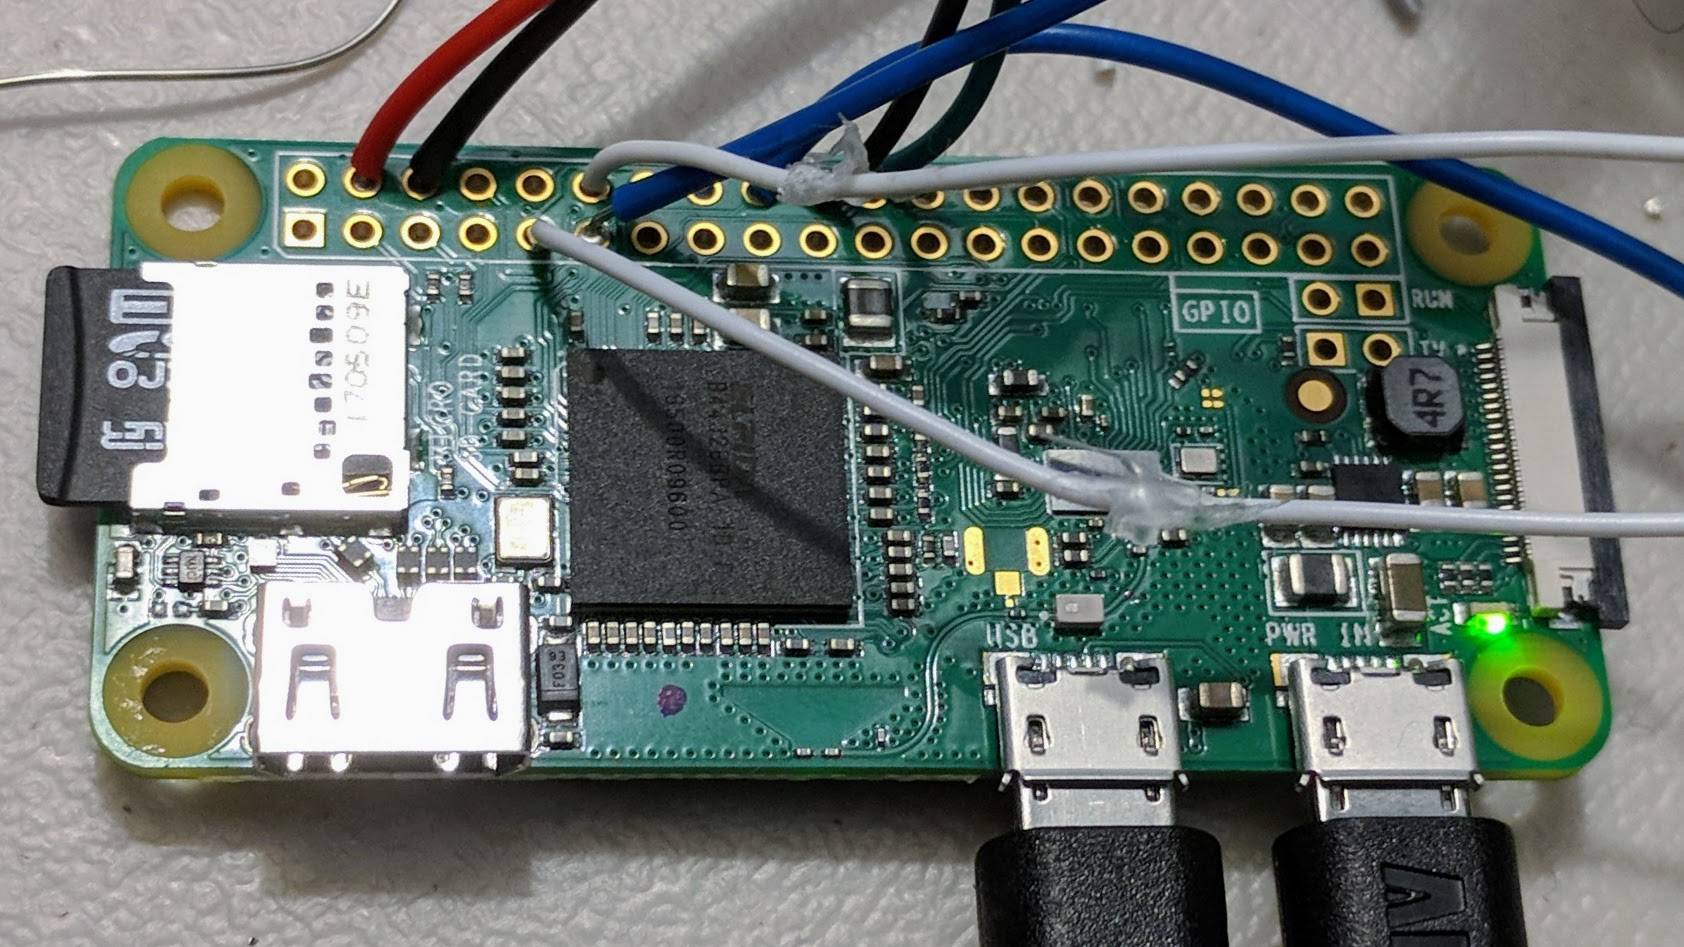 Raspberry Pi with connections to tree and custom
circuits